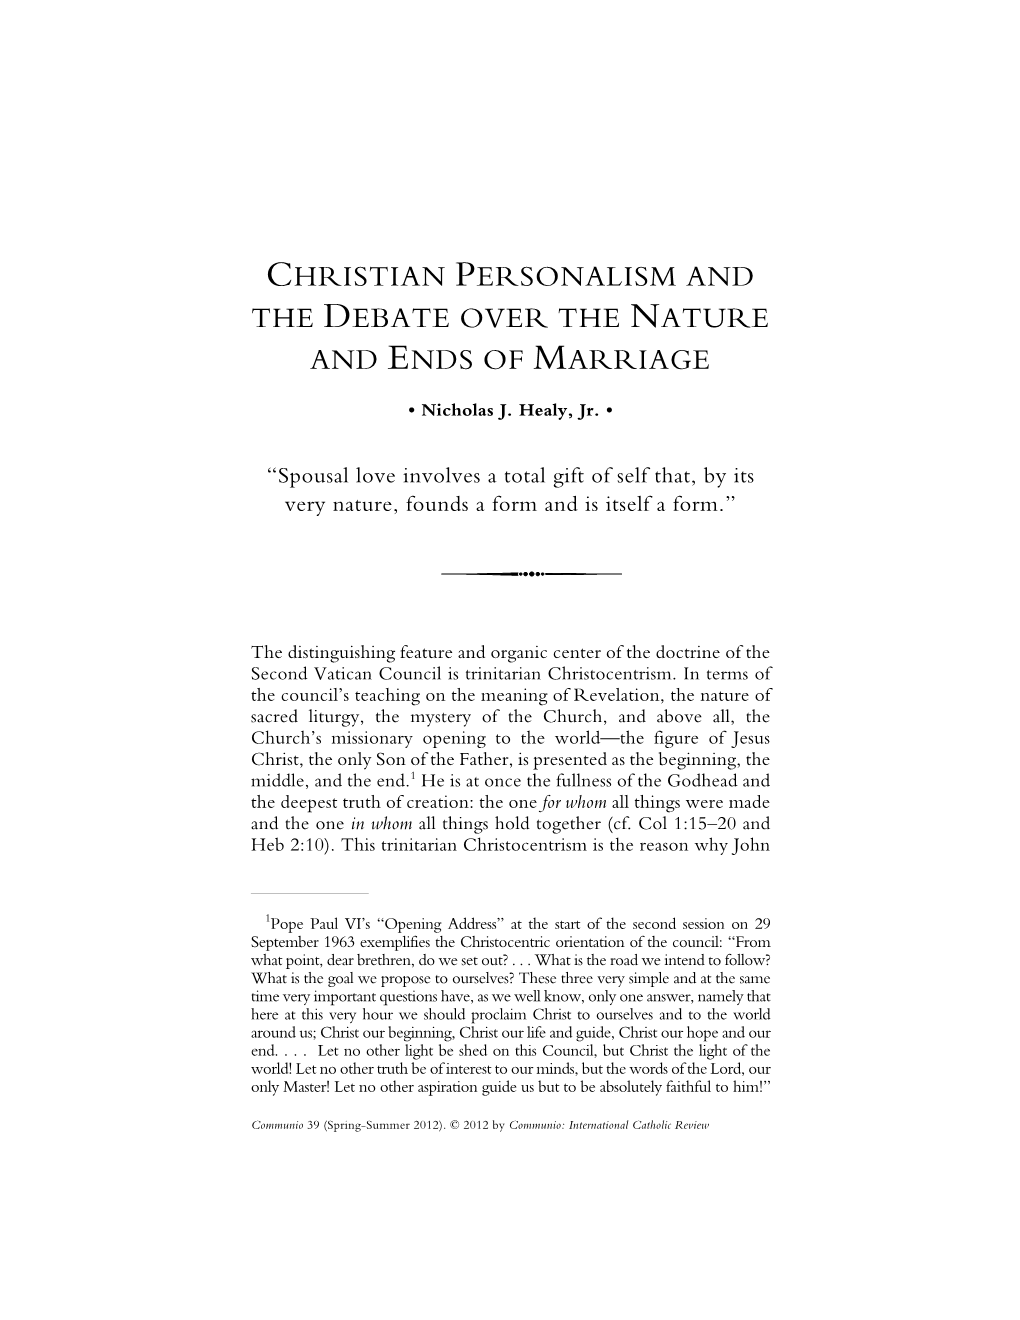 Christian Personalism and the Debate Over the Nature and Ends of Marriage